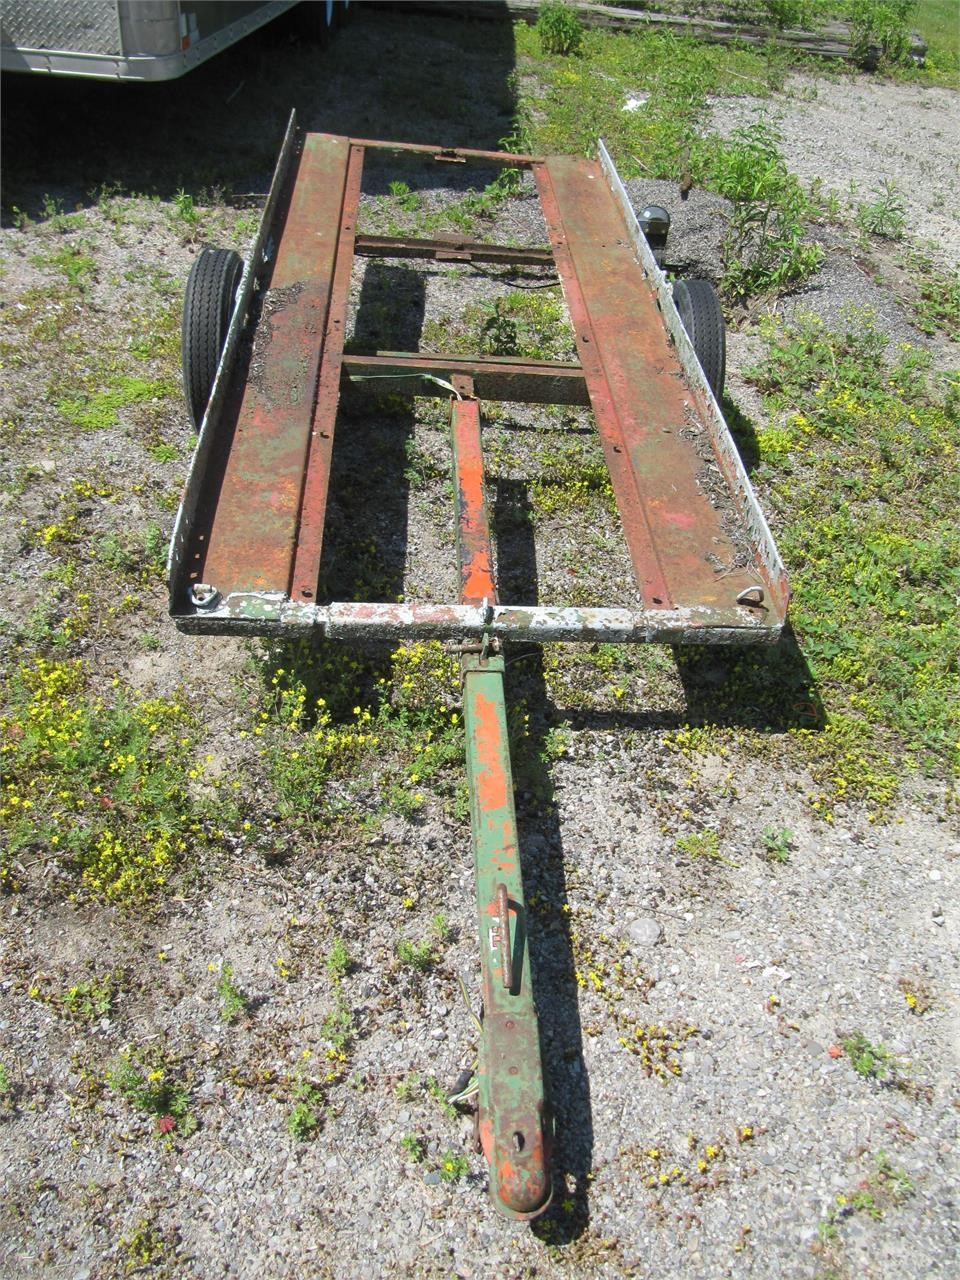 SMALL UTILITY TRAILER (NO OWNERSHIP)